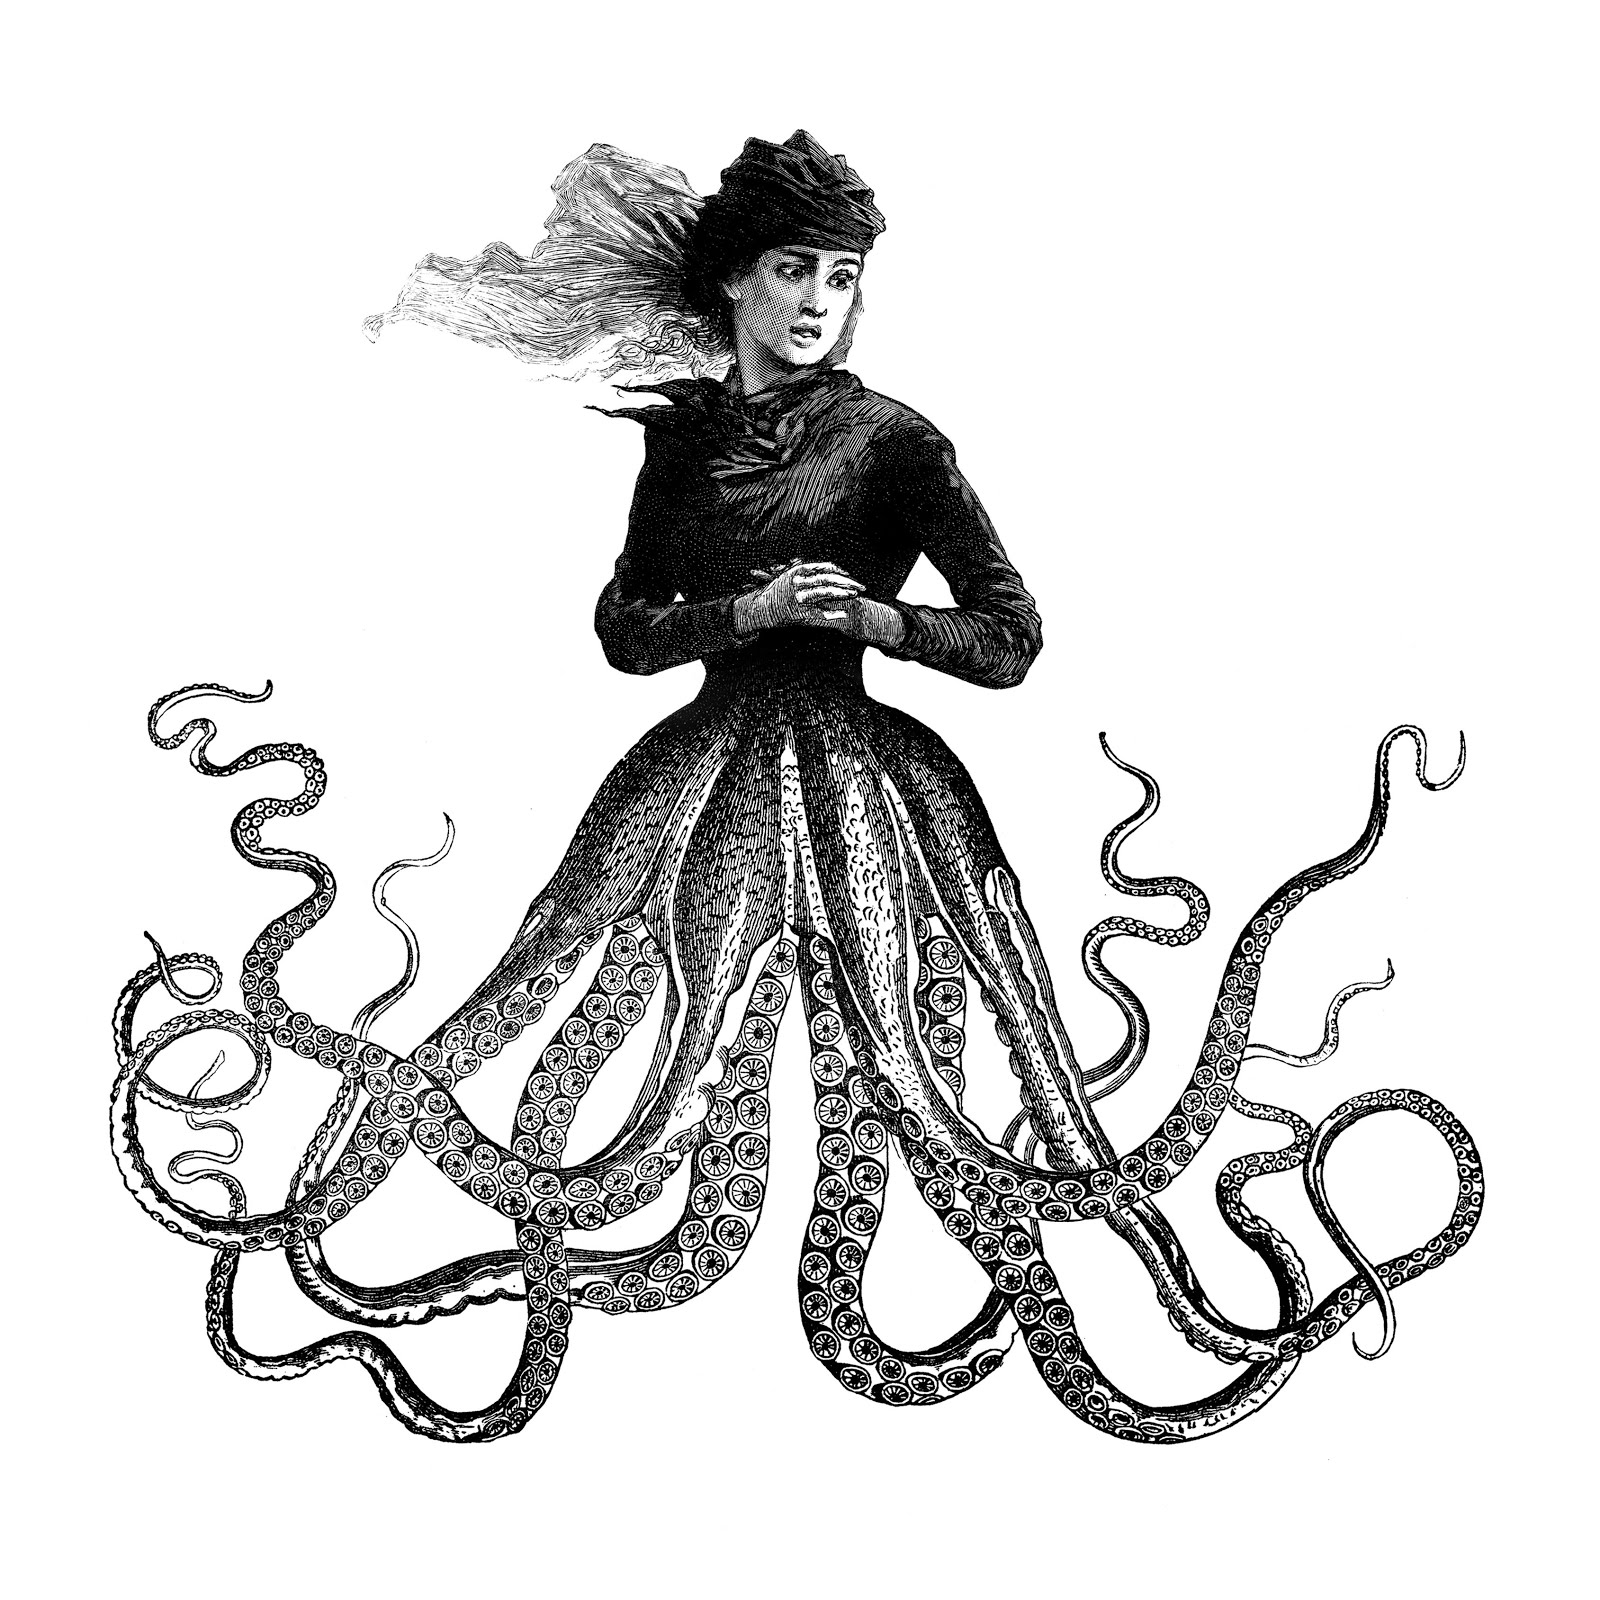 Snail Lady's Sister, --- The Octopus Woman...